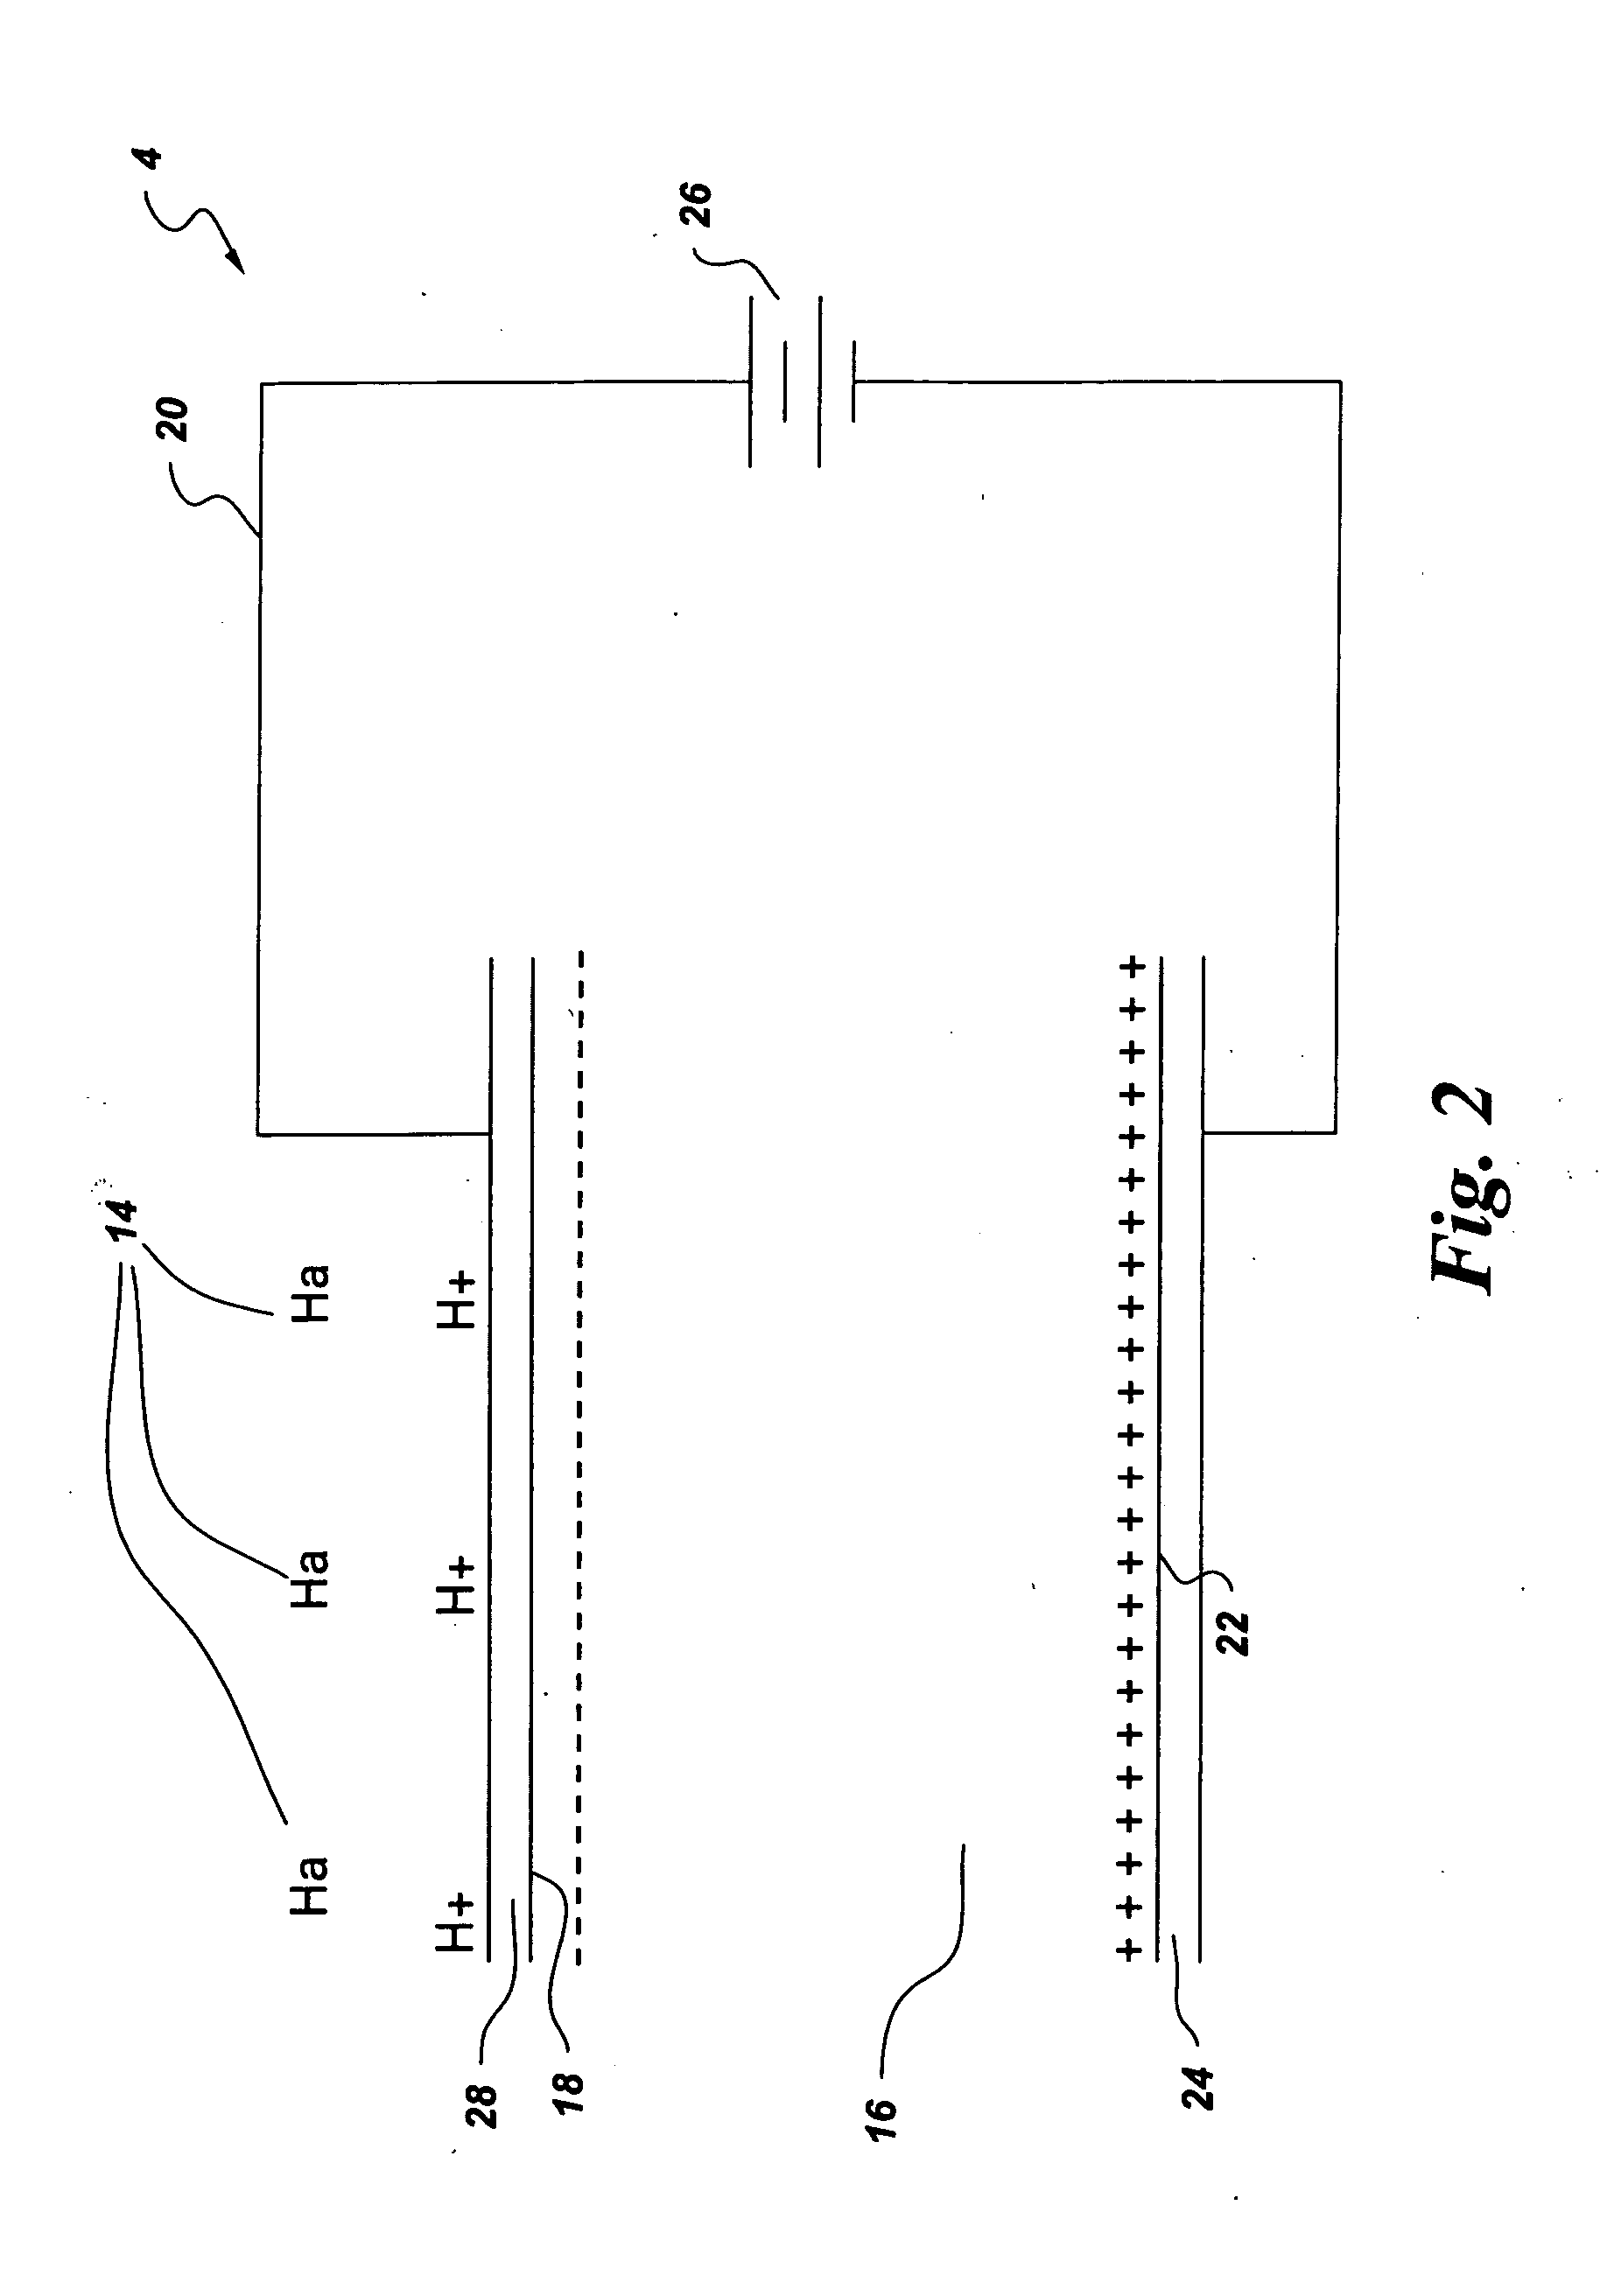 System and method for storing hydrogen and electrical energy